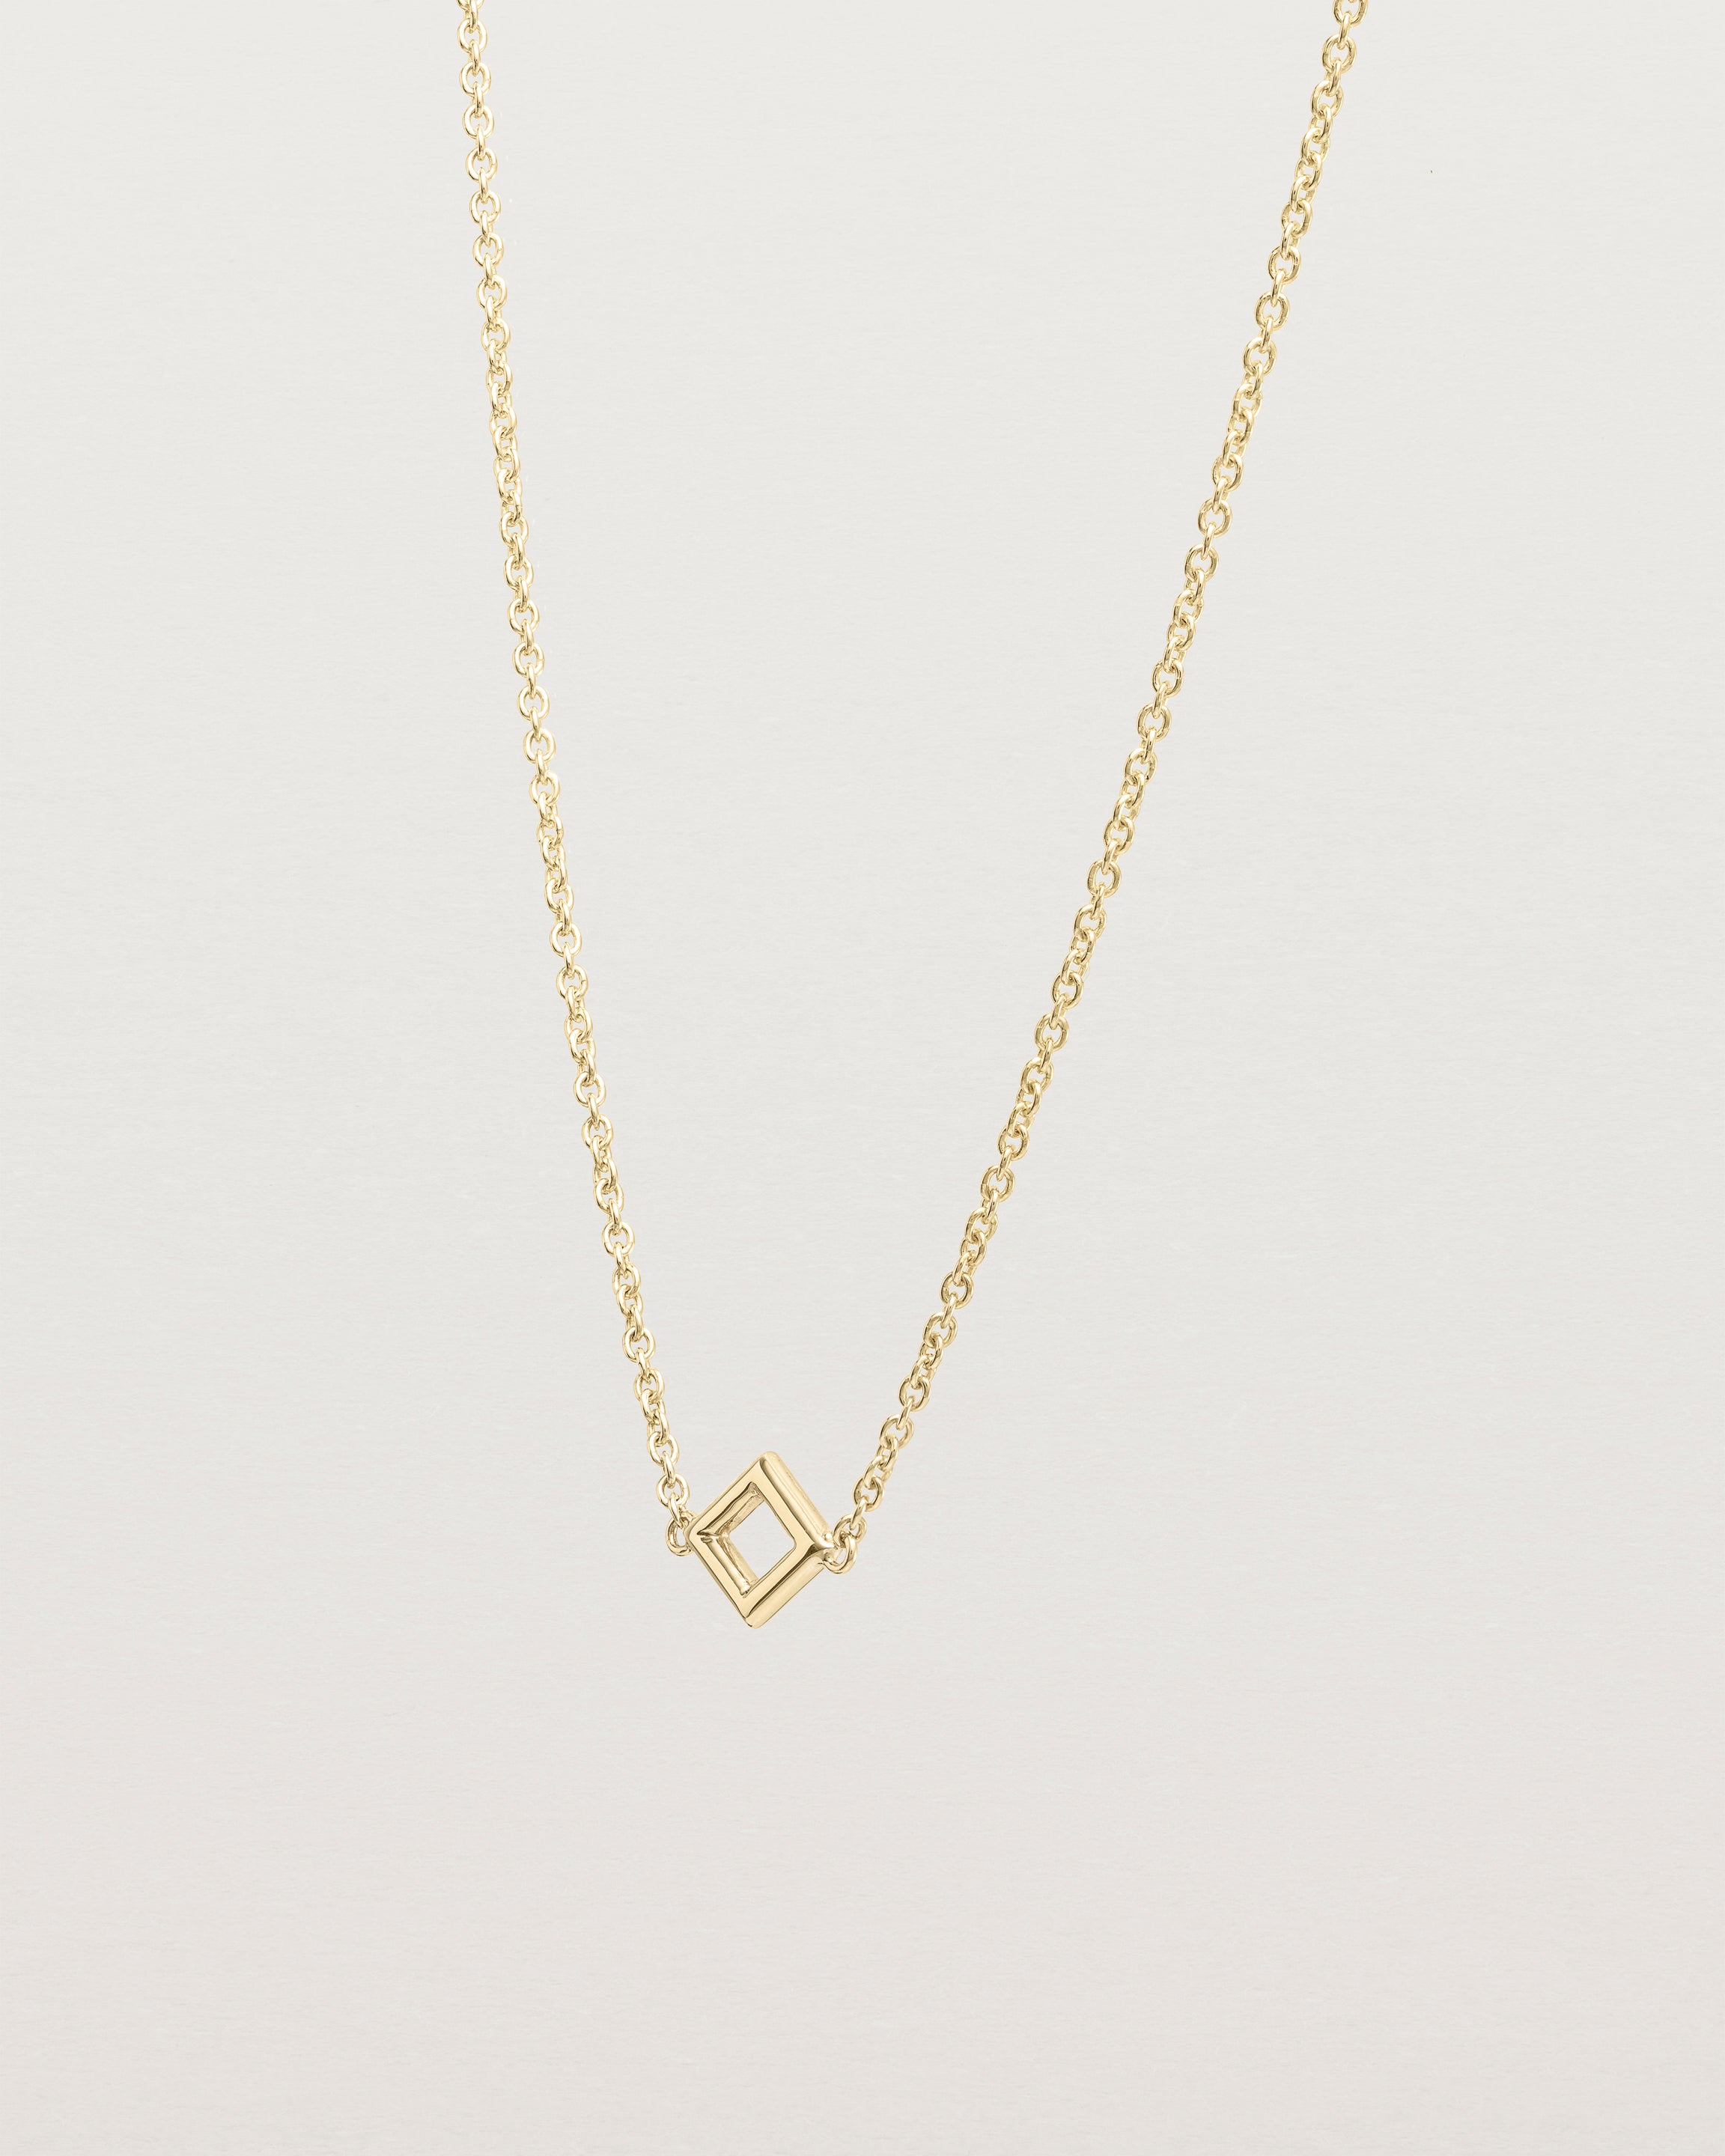 Angled view of the Nuna Necklace | Yellow Gold.